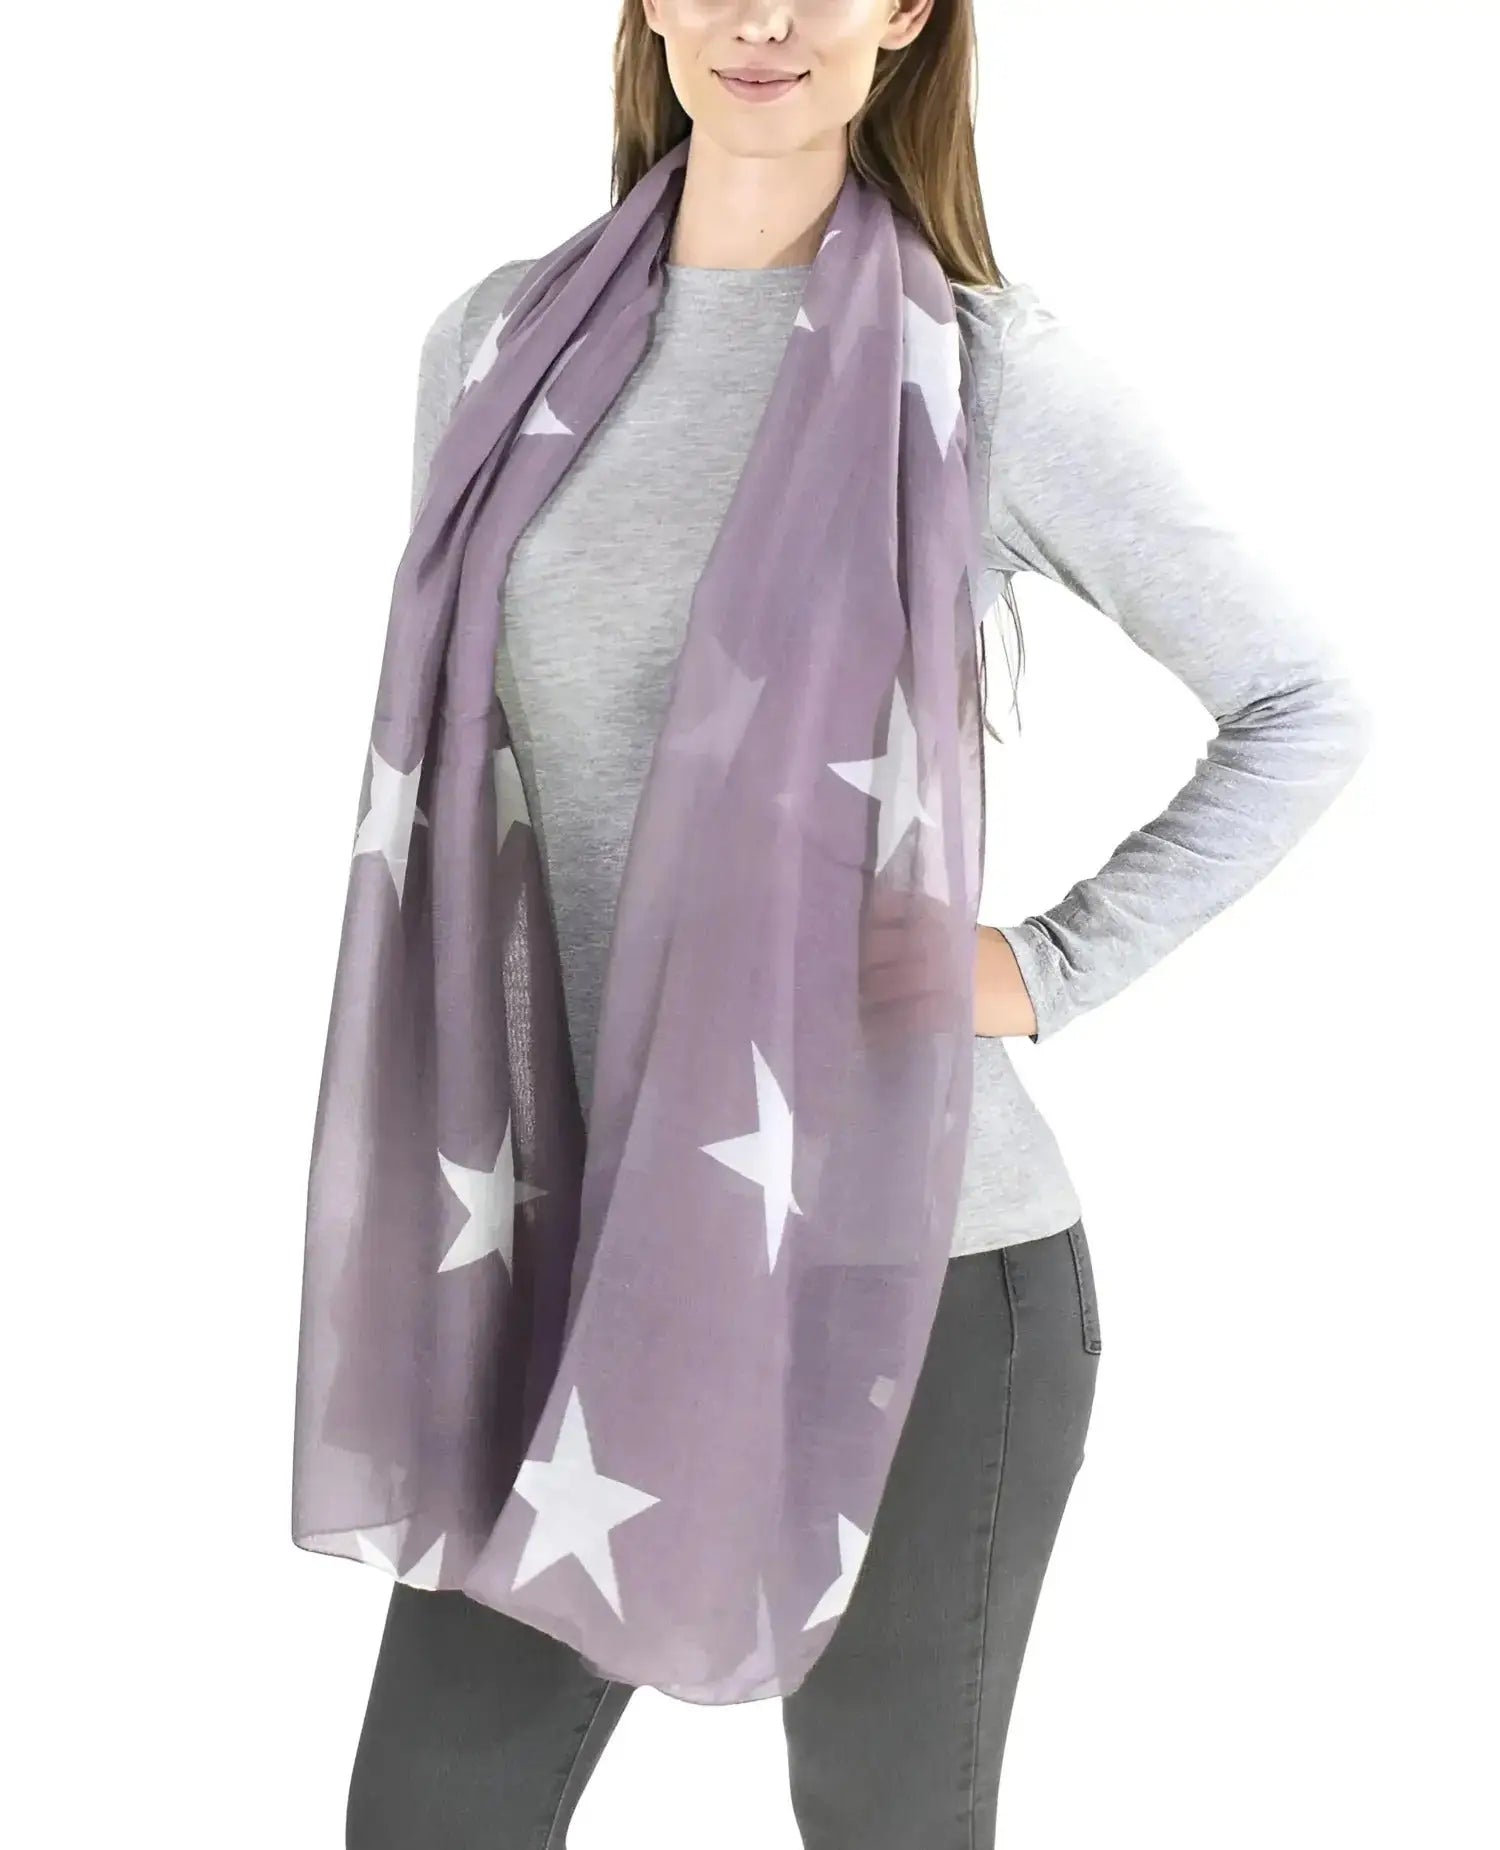 Retro Star Oversized Scarf with Woman Model